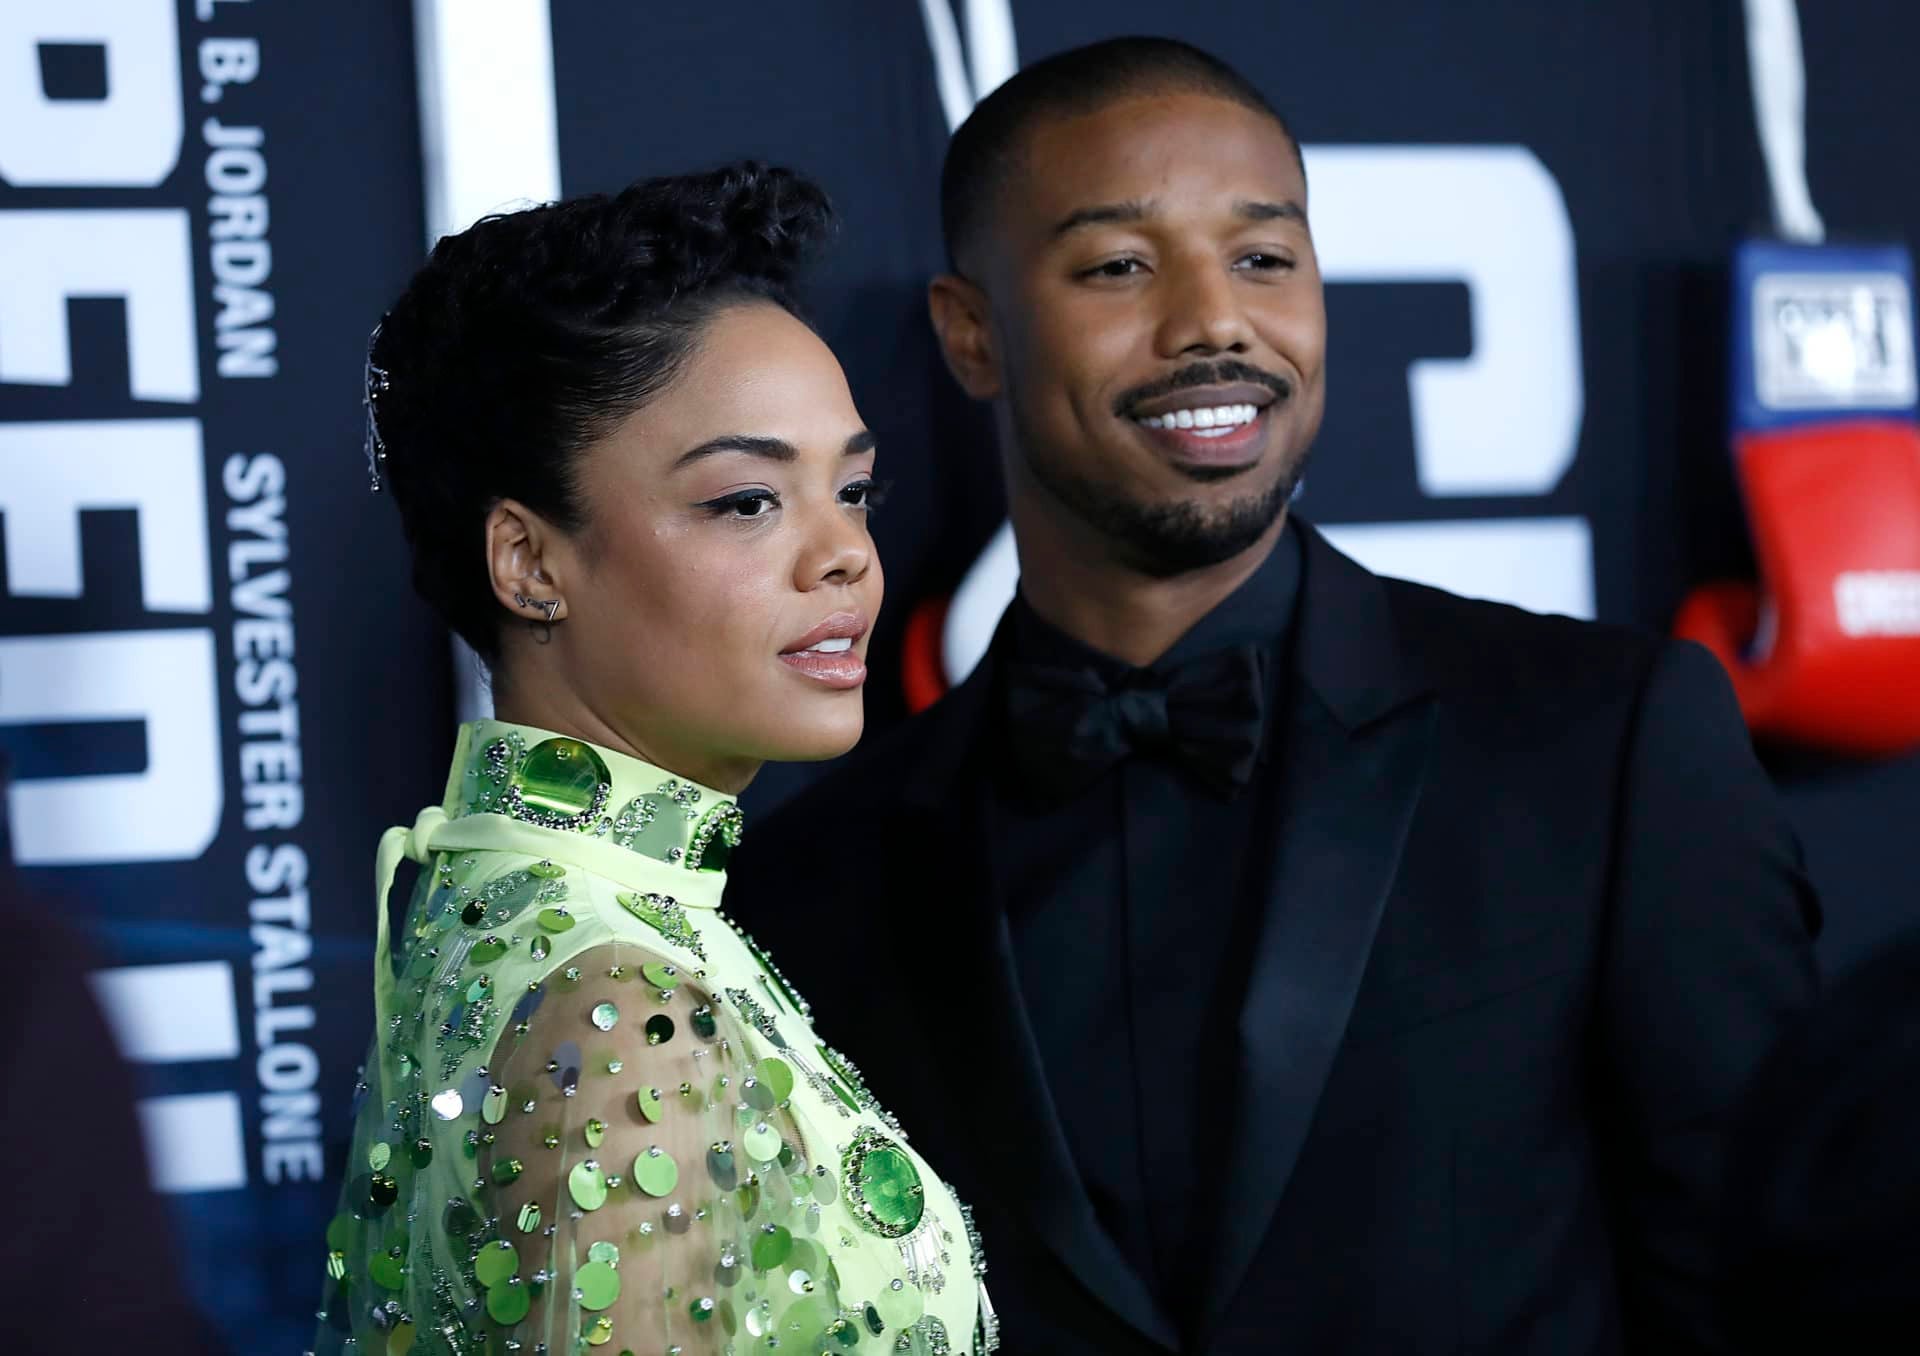 Watch Michael B. Jordan, Tessa Thompson And More Talk About The Beauty Of Black Love